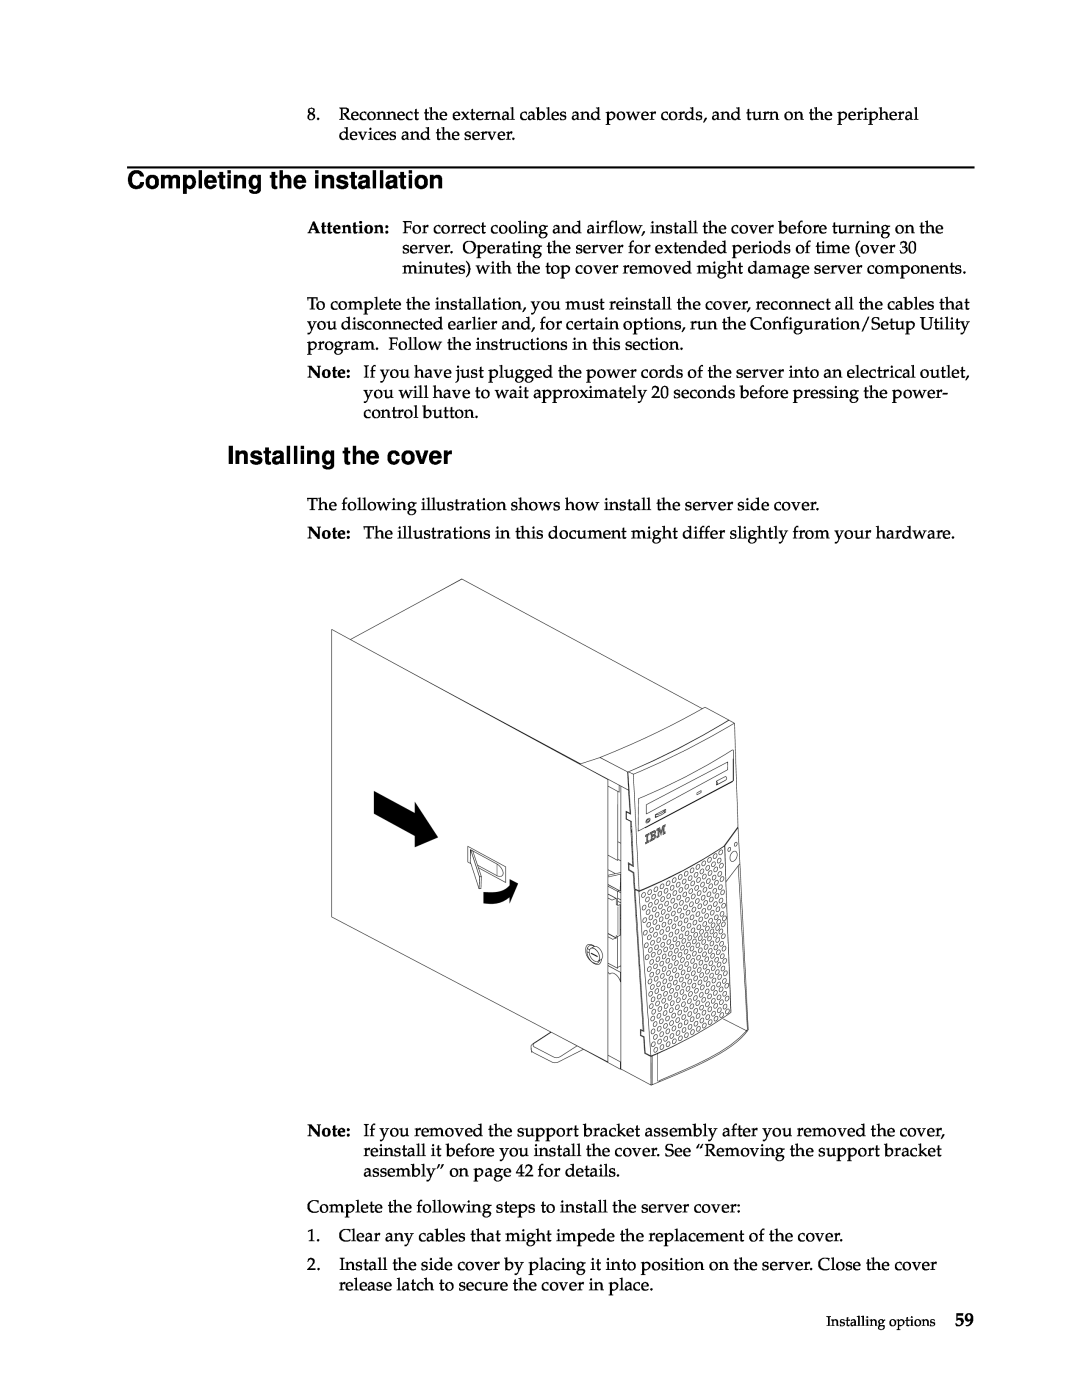 IBM x Series 200 manual Completing the installation, Installing the cover 